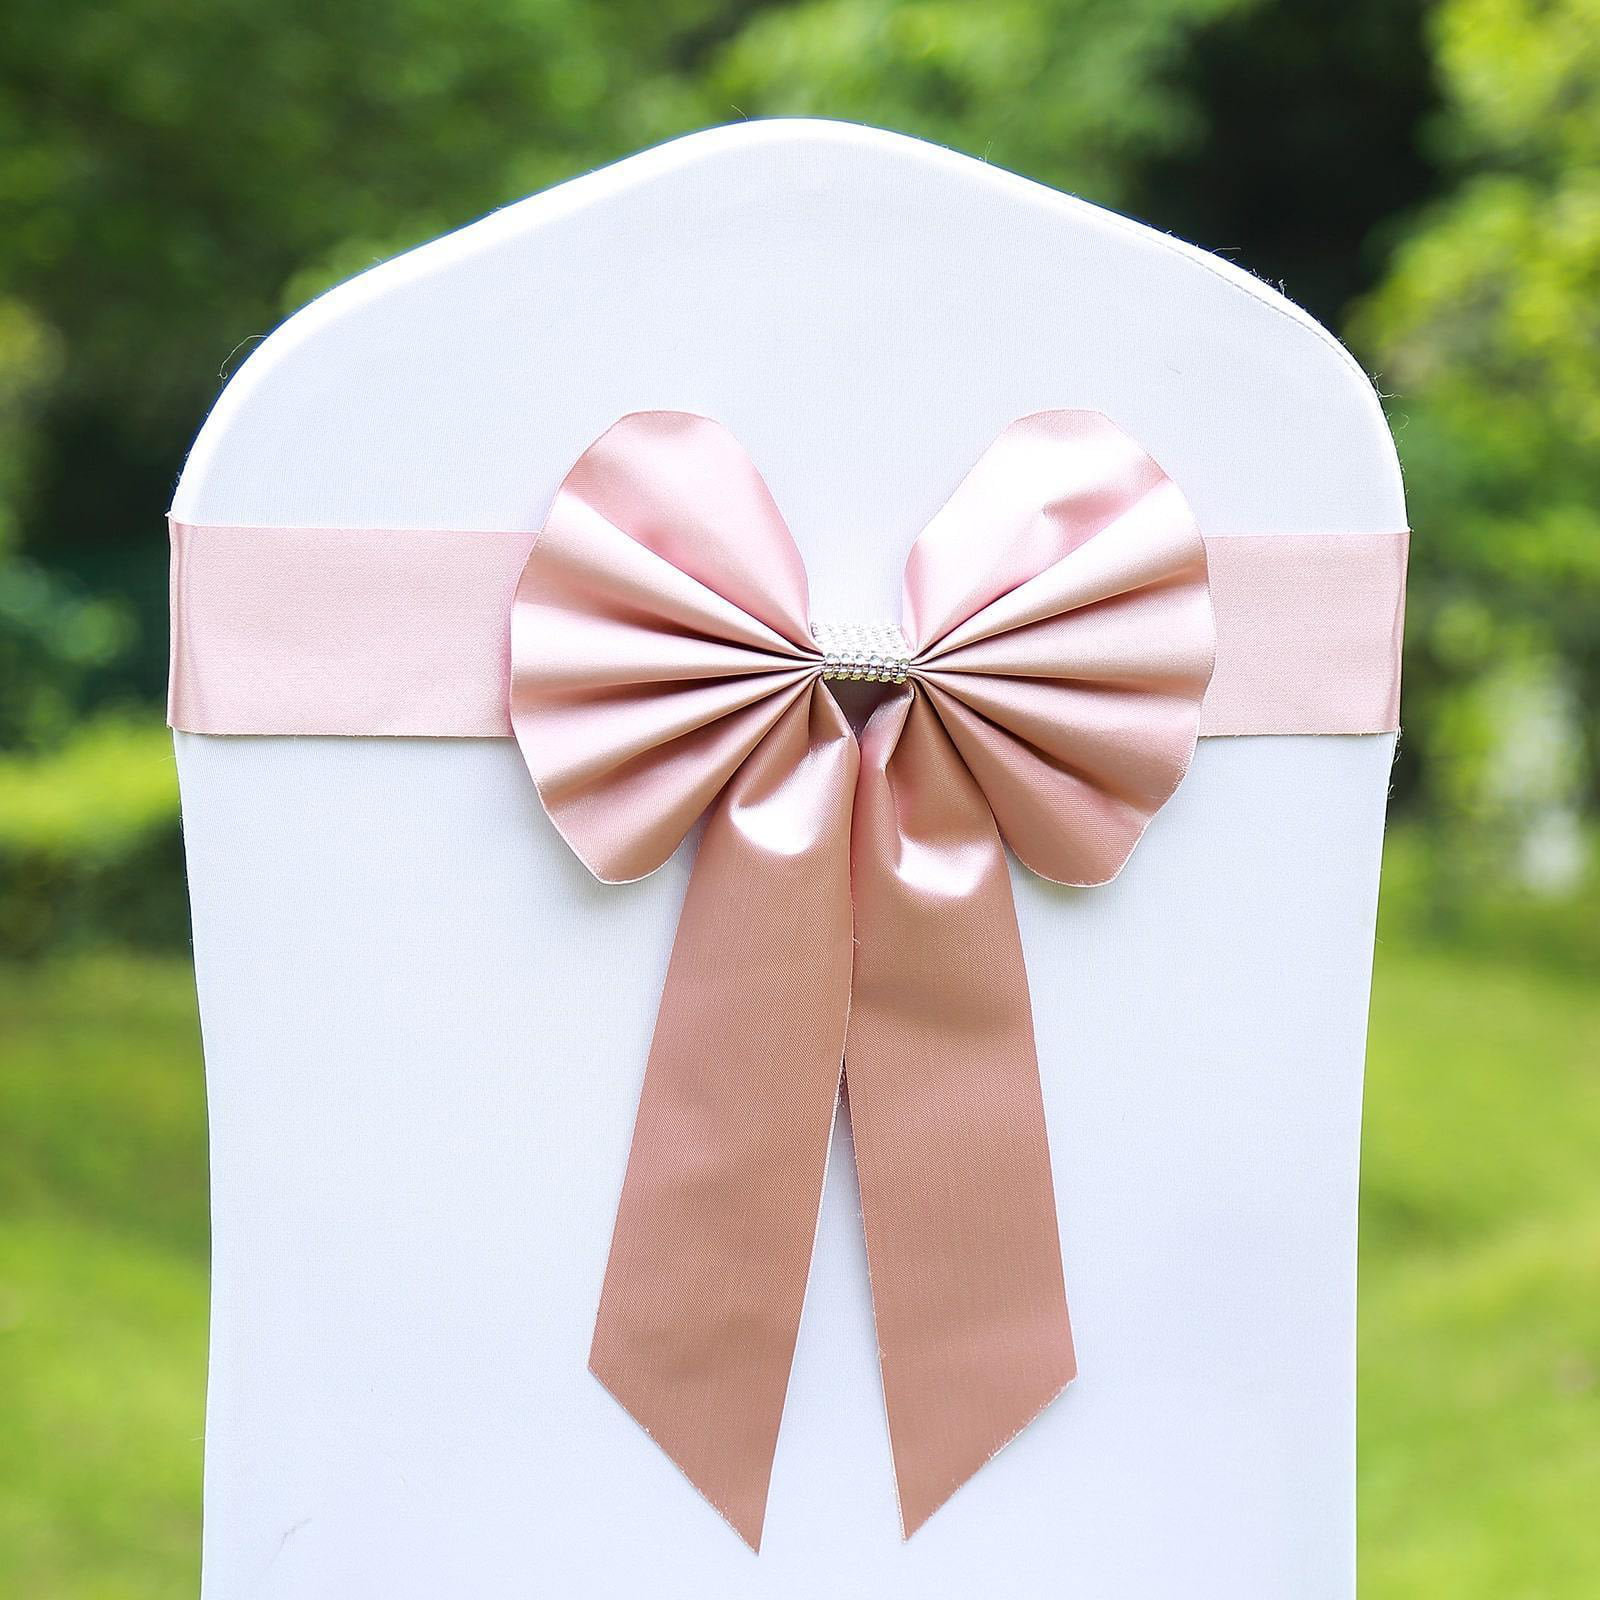 PINK 8" PULL BOWS PK OF 10 RIBBON PARTY WEDDING GIFT TOPPER CHAIR DECORATION 